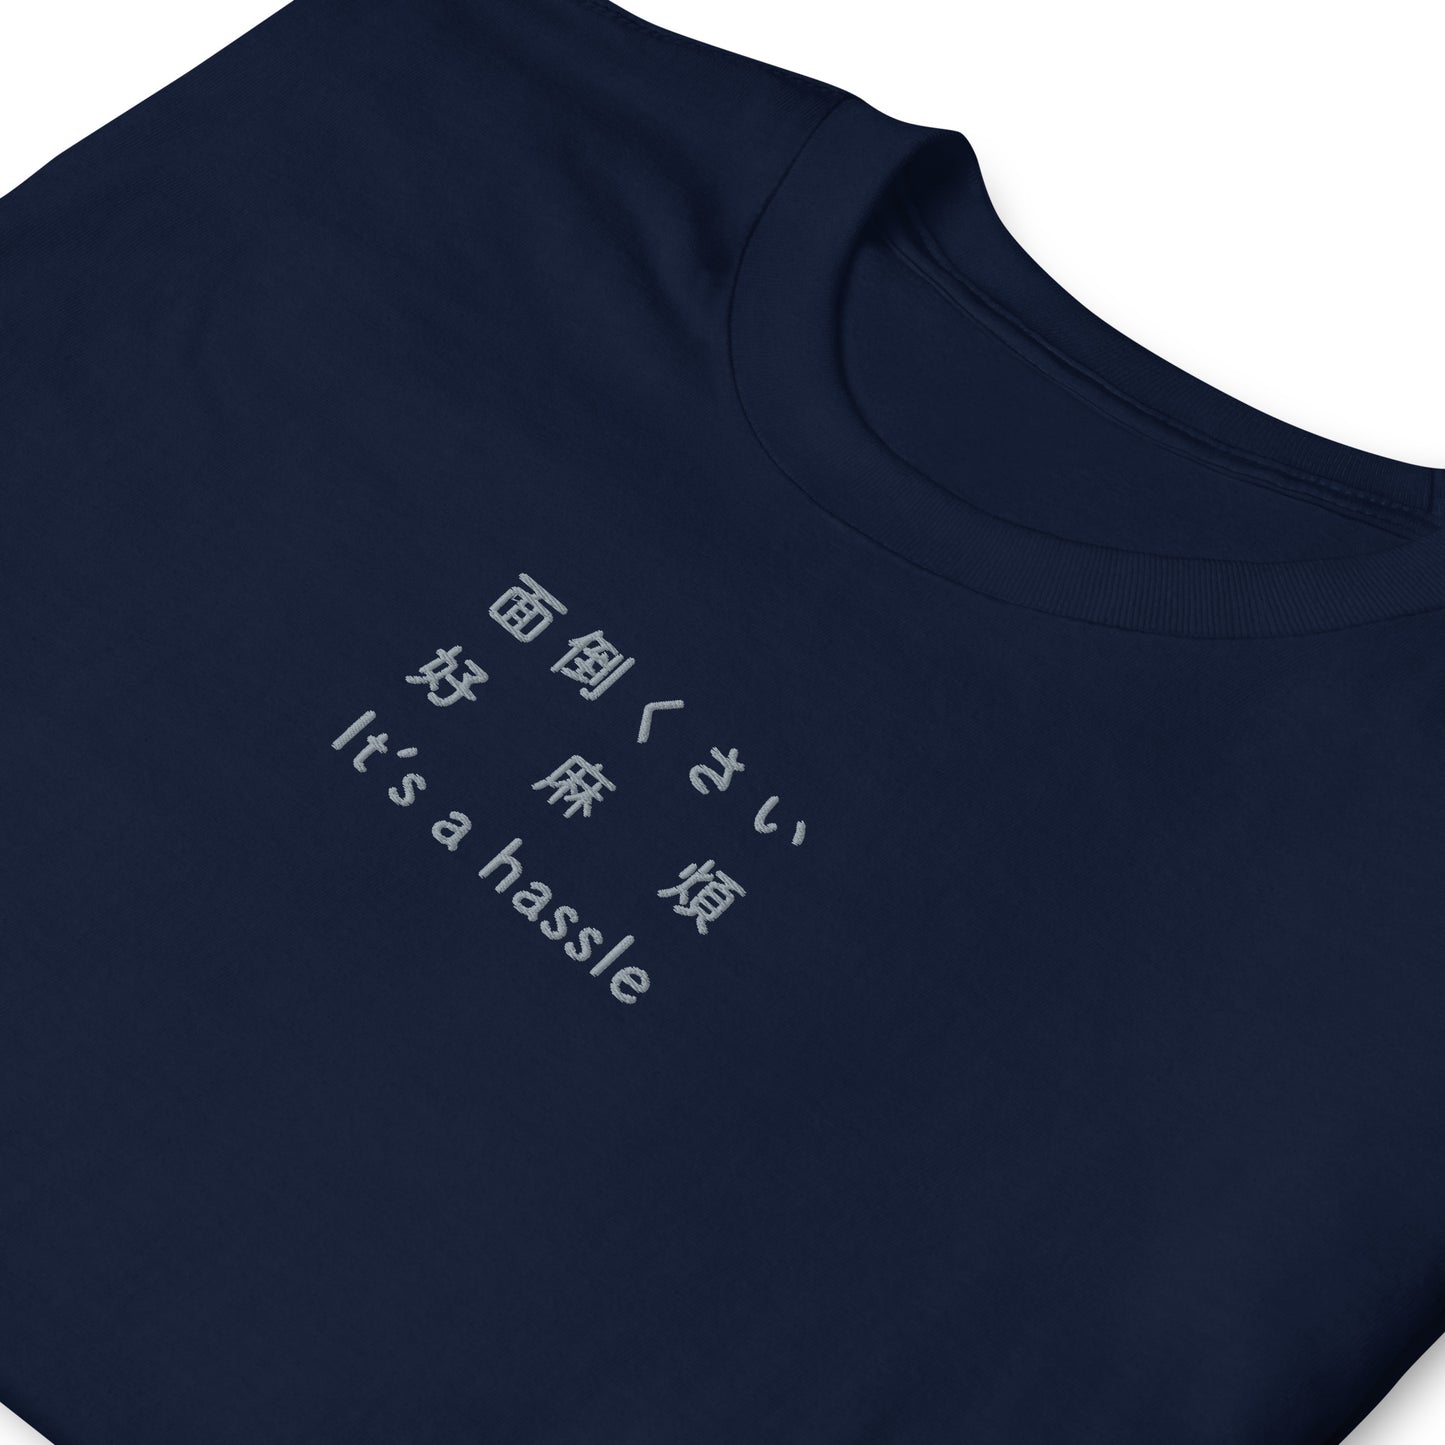 Navy High Quality Tee - Front Design with an Light GrayEmbroidery "It's a hassle" in Japanese,Chinese and English